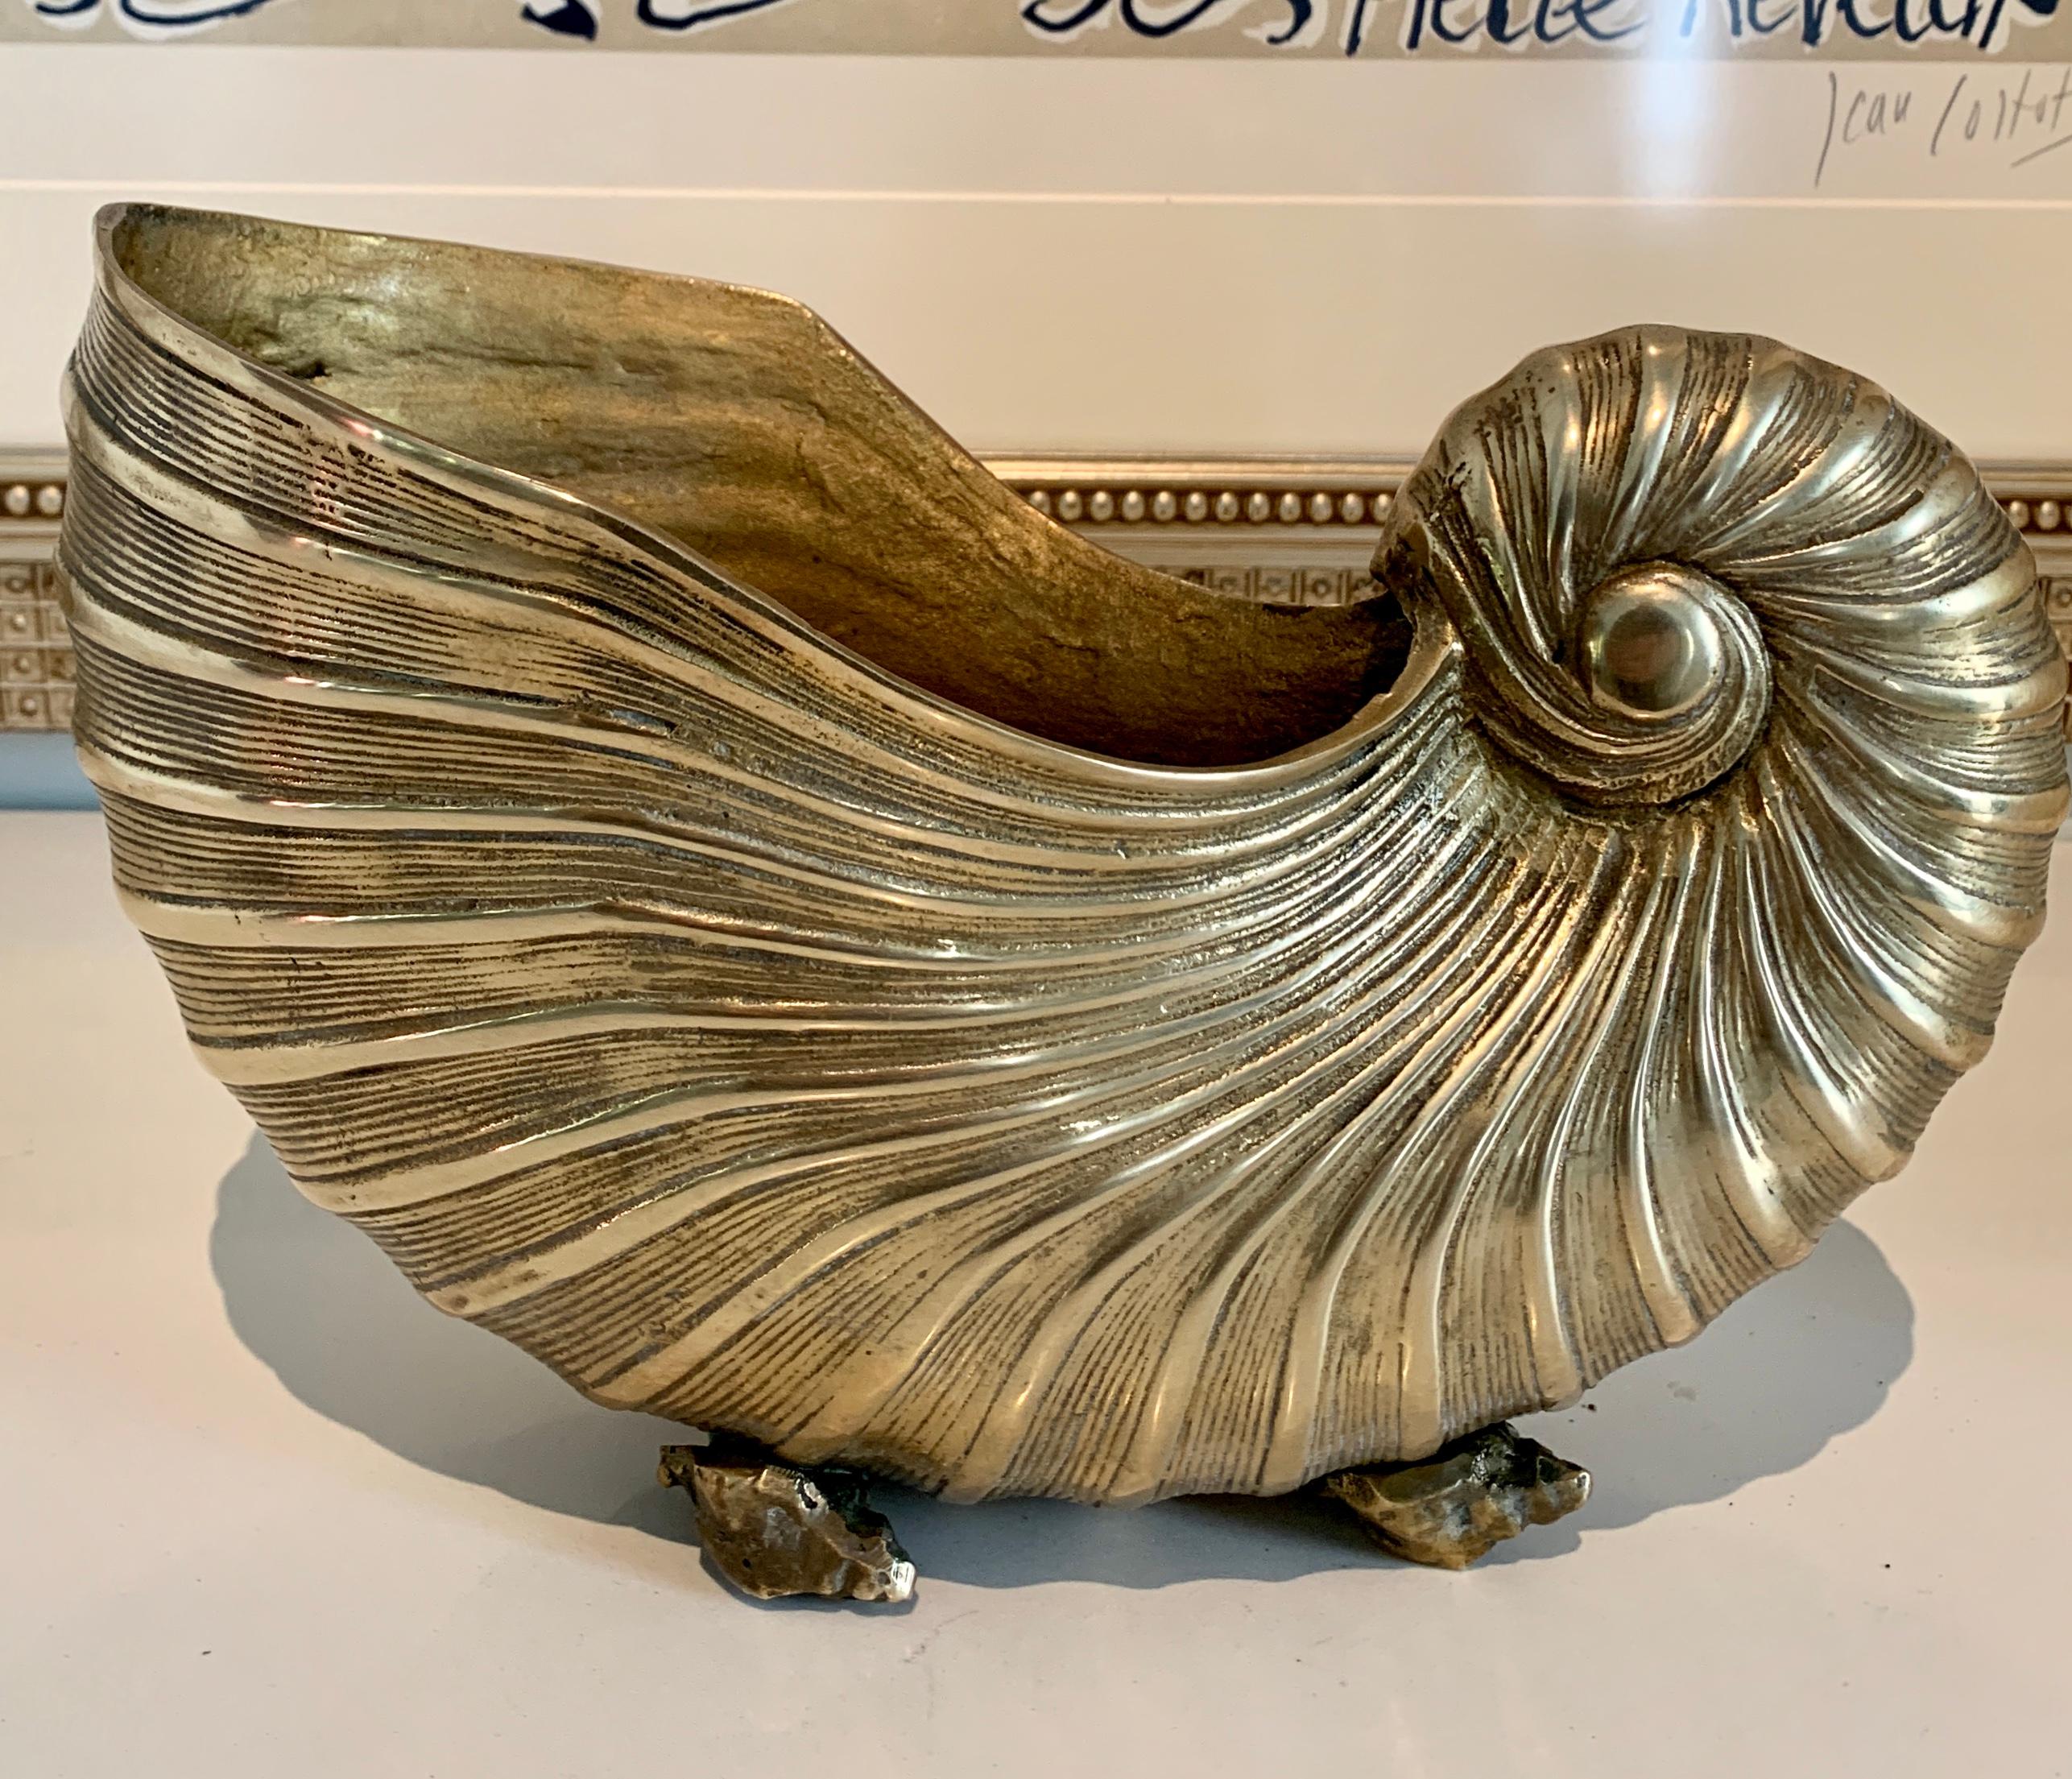 Solid brass sea shell nautilus planter jardiniere or cachepot - a stunning piece well suited as a centerpiece. The size also makes it a good piece to hold mail or as a catch all - also great as a stand alone piece.